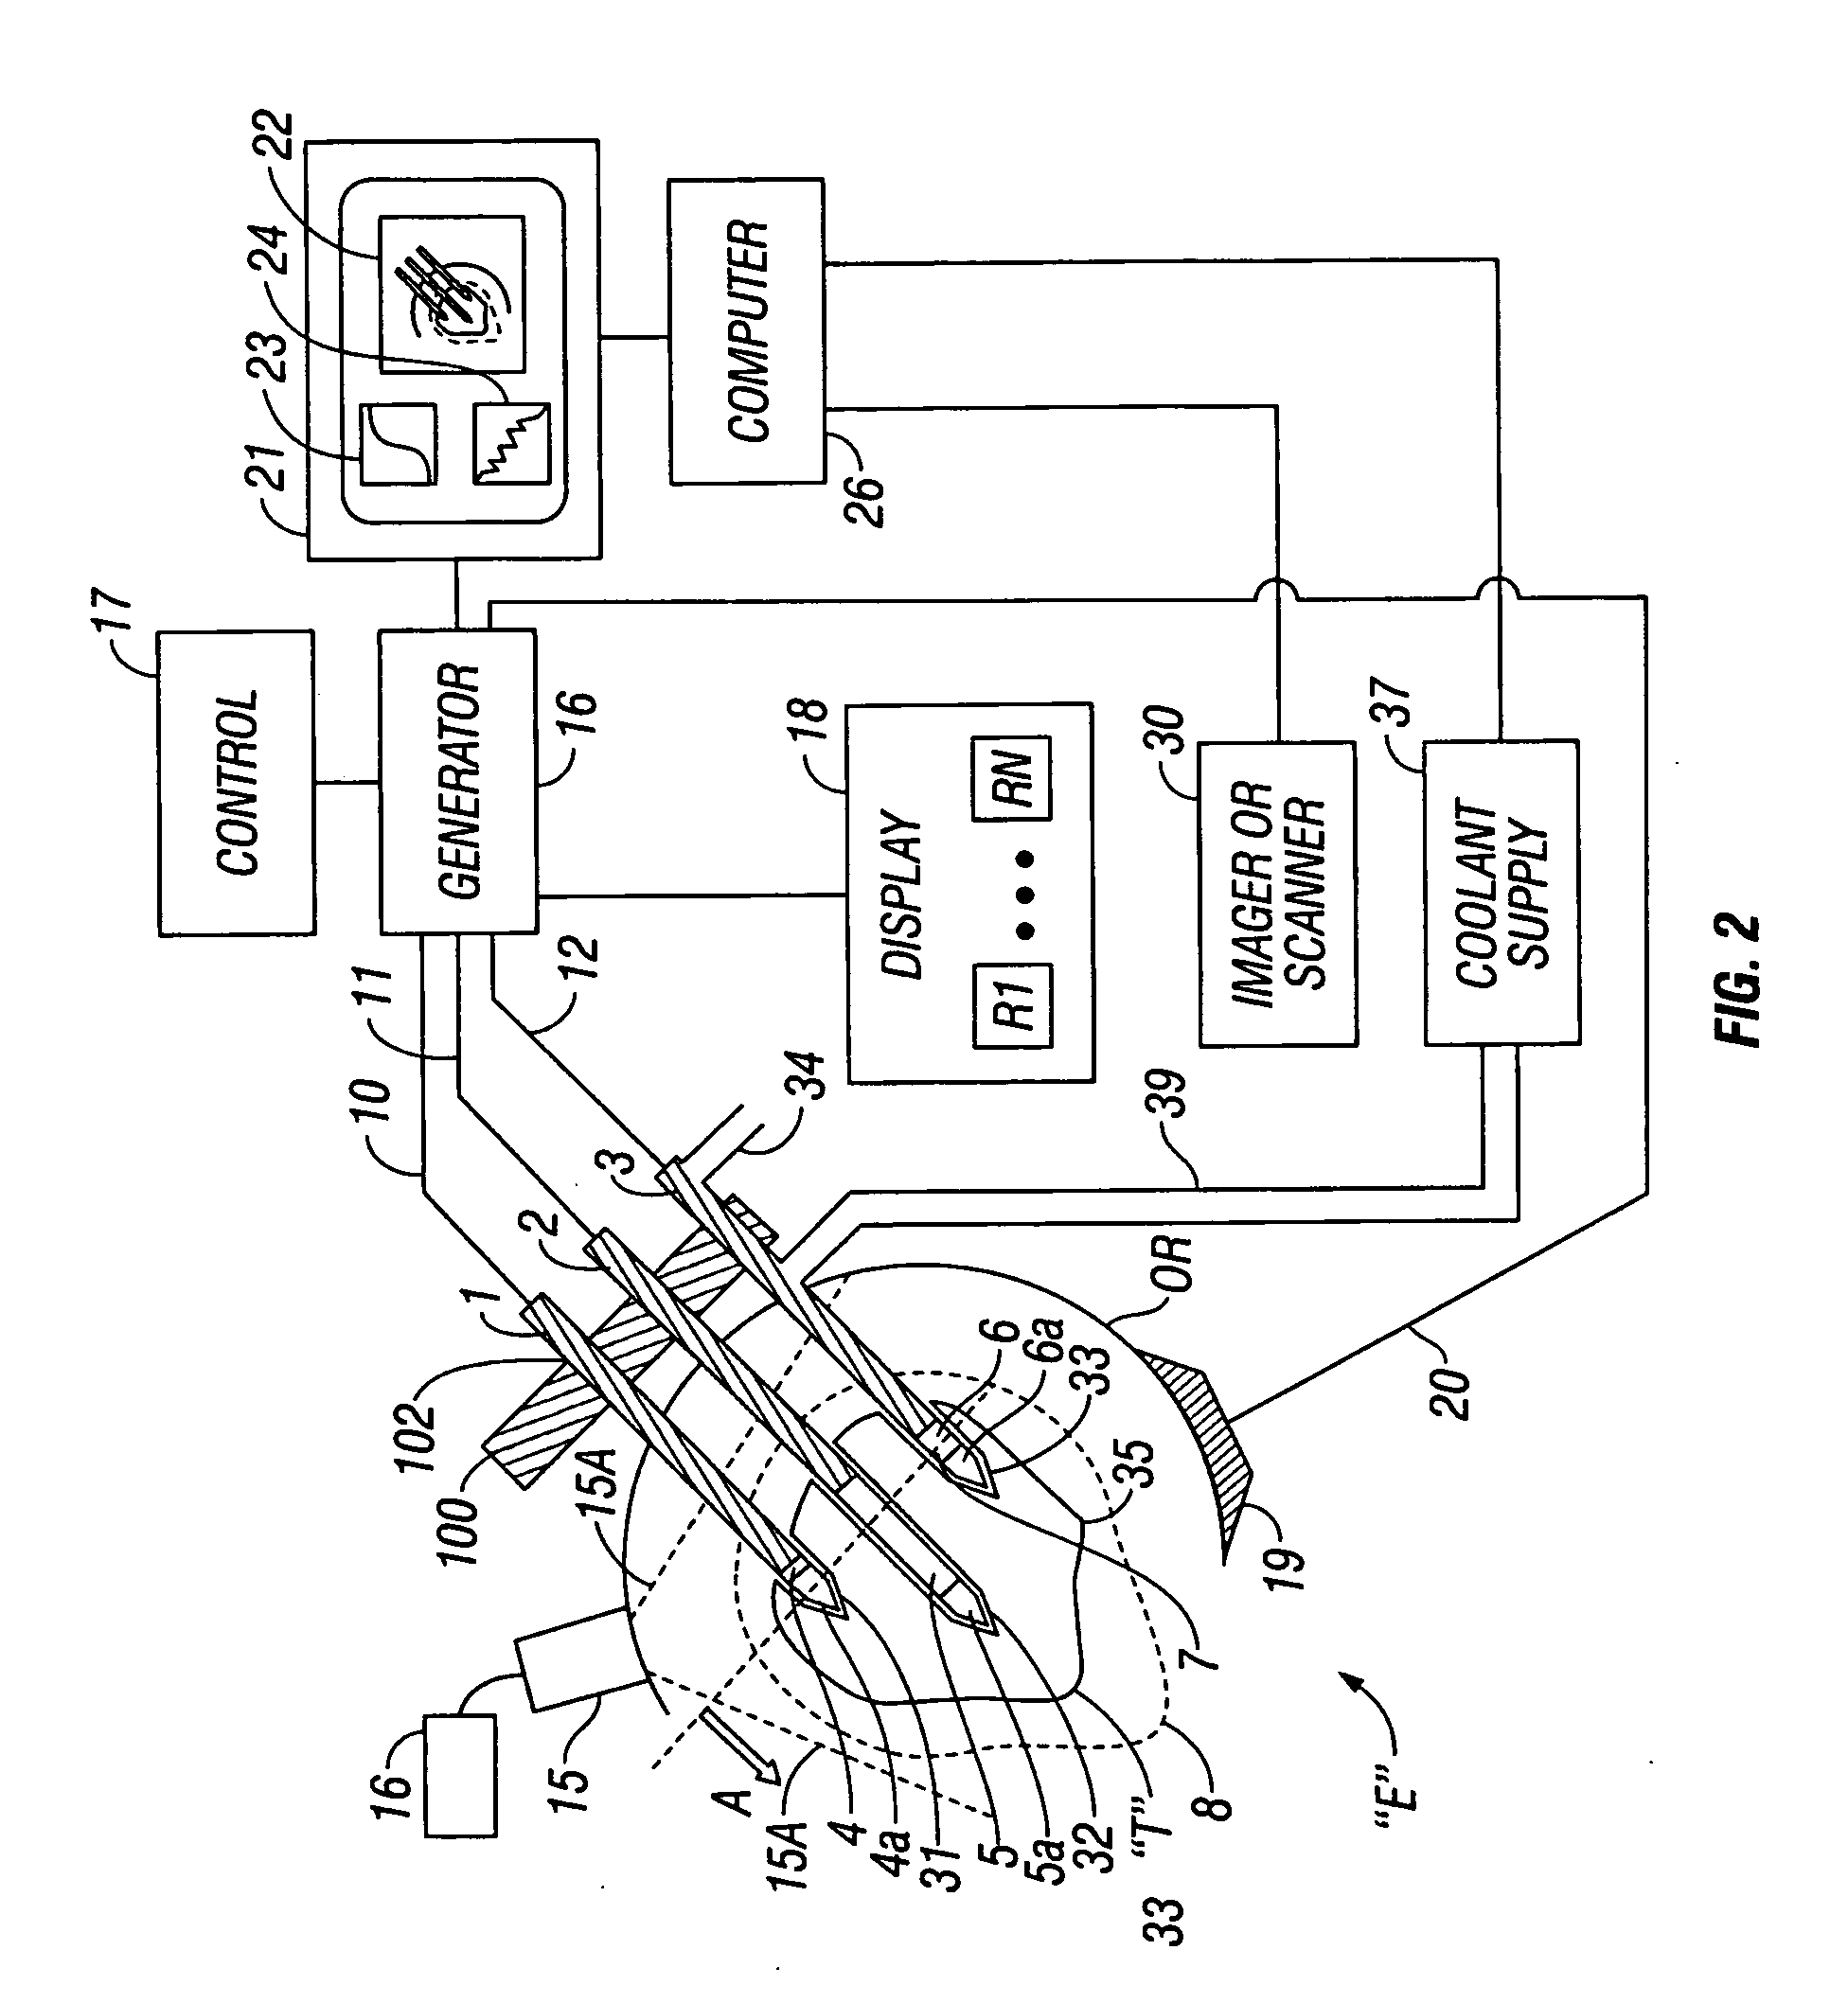 System and method for ablating tissue